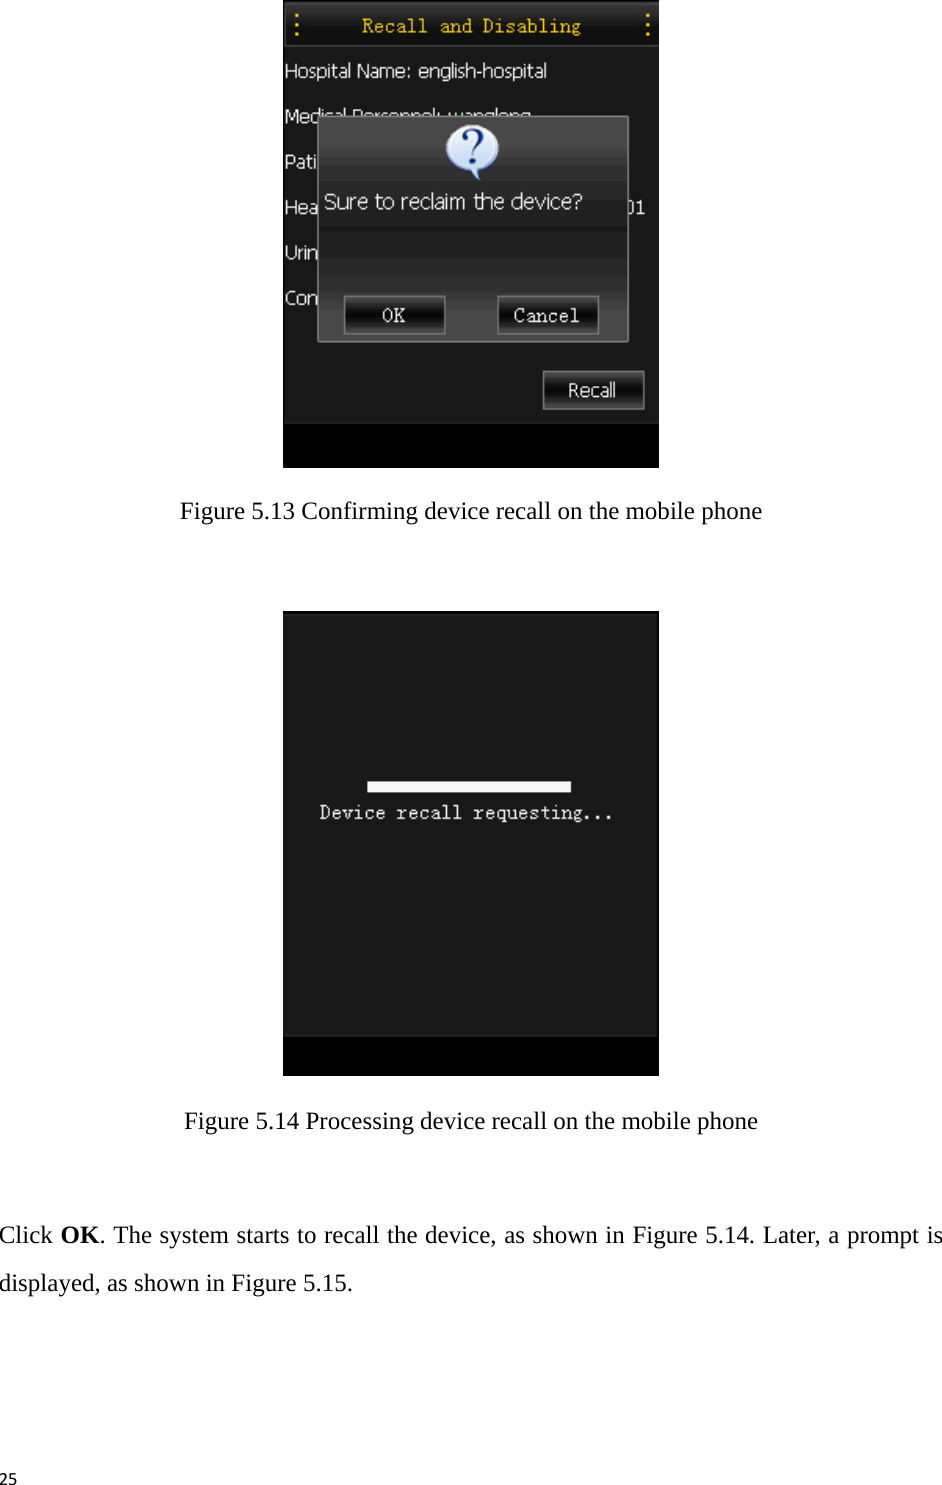 25 Figure 5.13 Confirming device recall on the mobile phone   Figure 5.14 Processing device recall on the mobile phone  Click OK. The system starts to recall the device, as shown in Figure 5.14. Later, a prompt is displayed, as shown in Figure 5.15. 